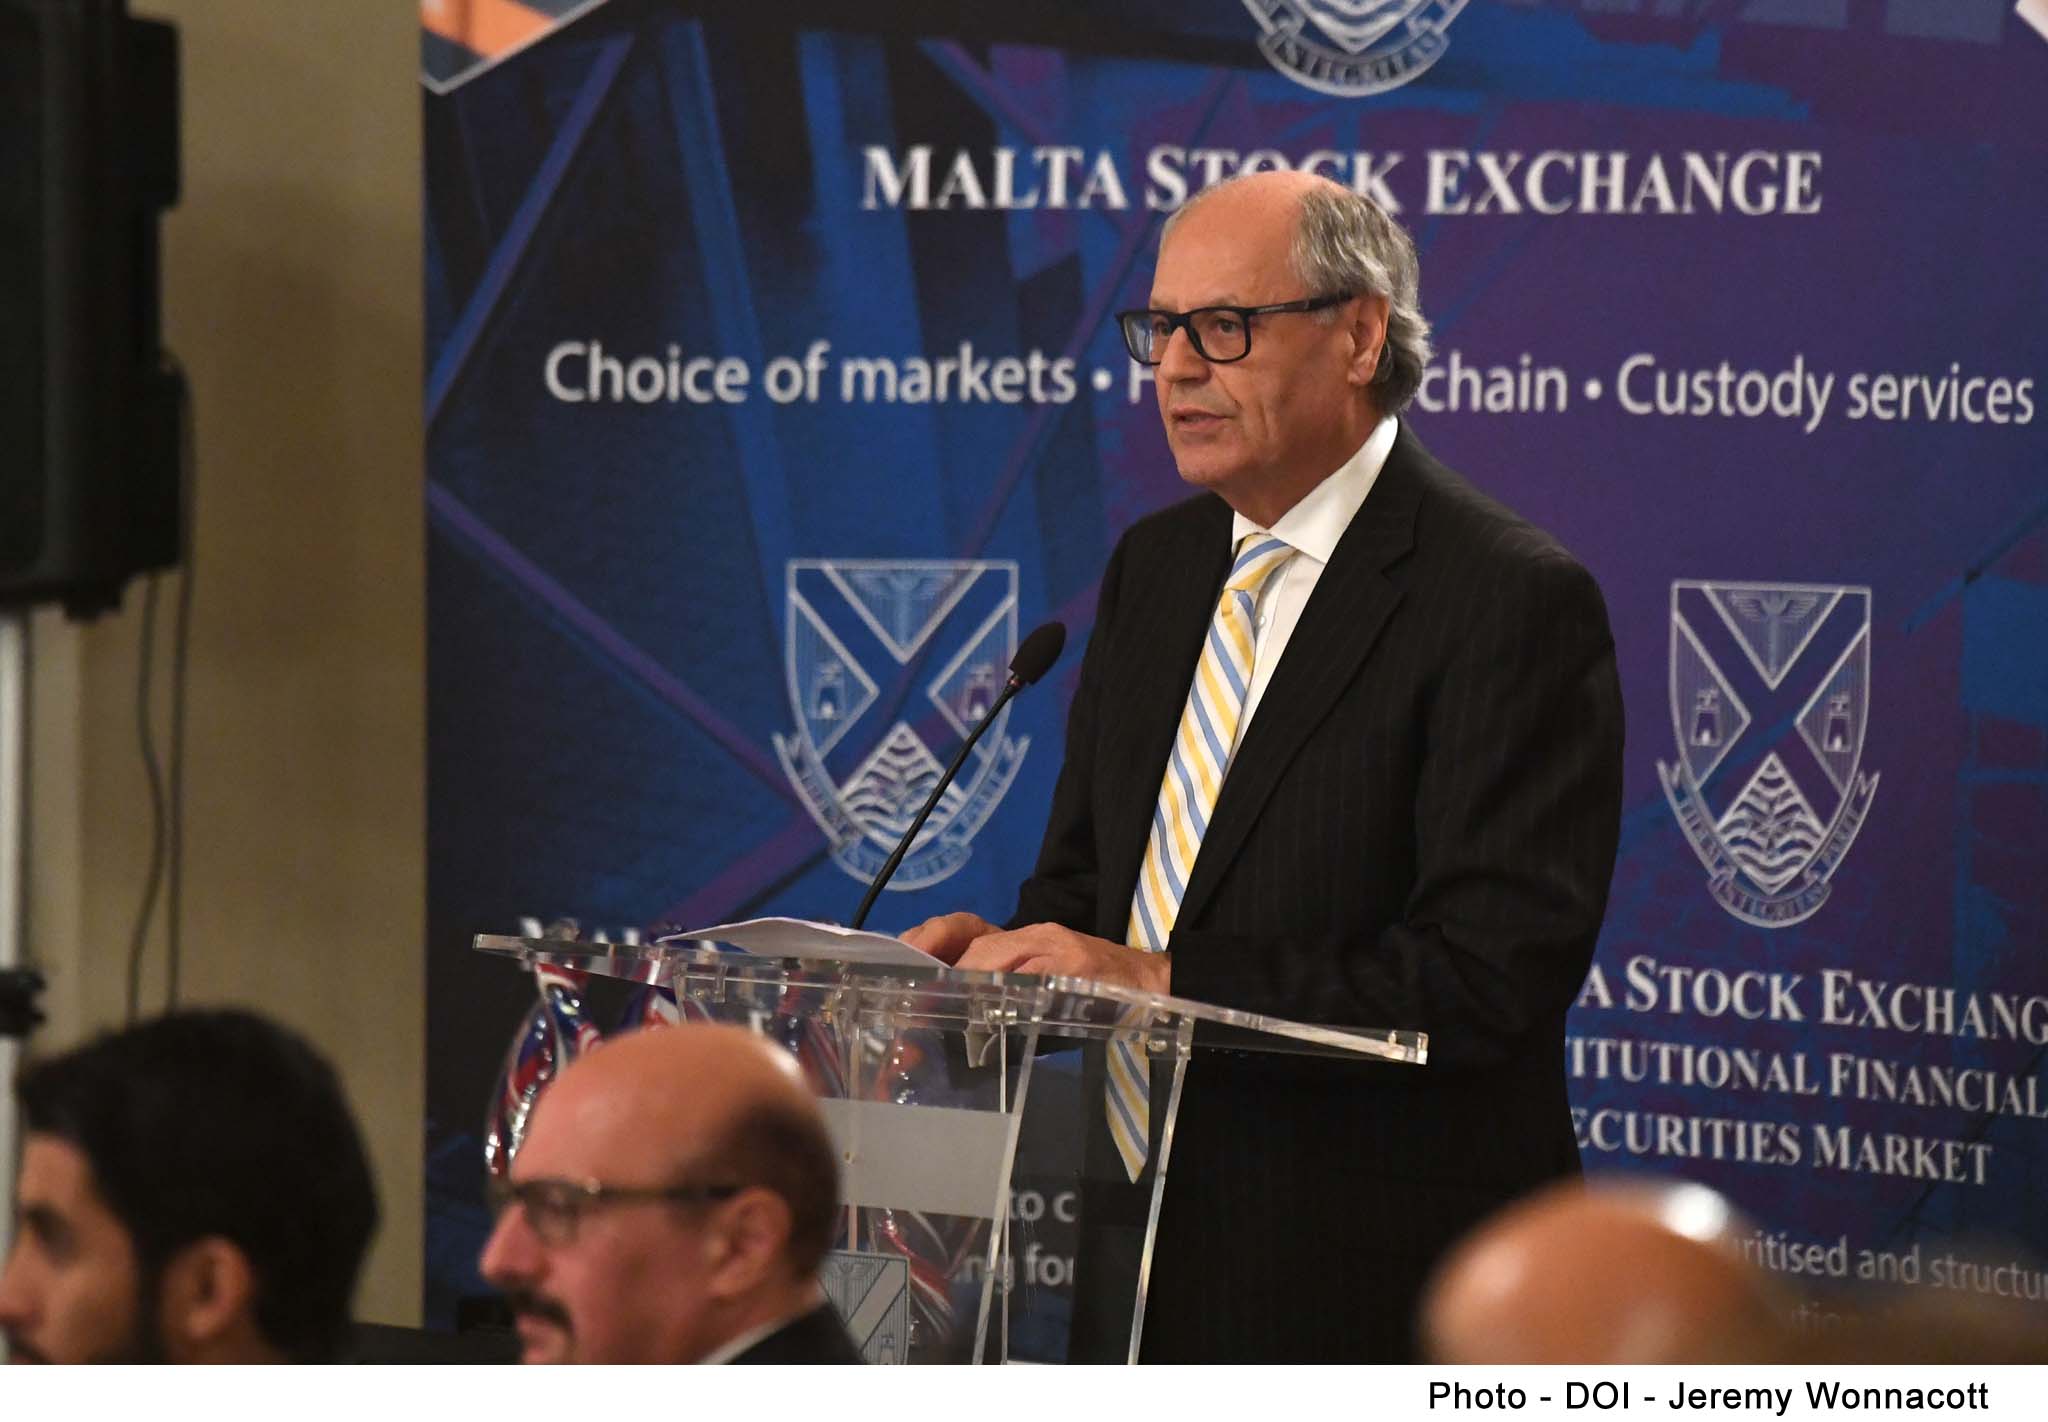 Persistence and entrepreneurial spirit of the Maltese nation will see it through the challenges of increased regulatory requirements